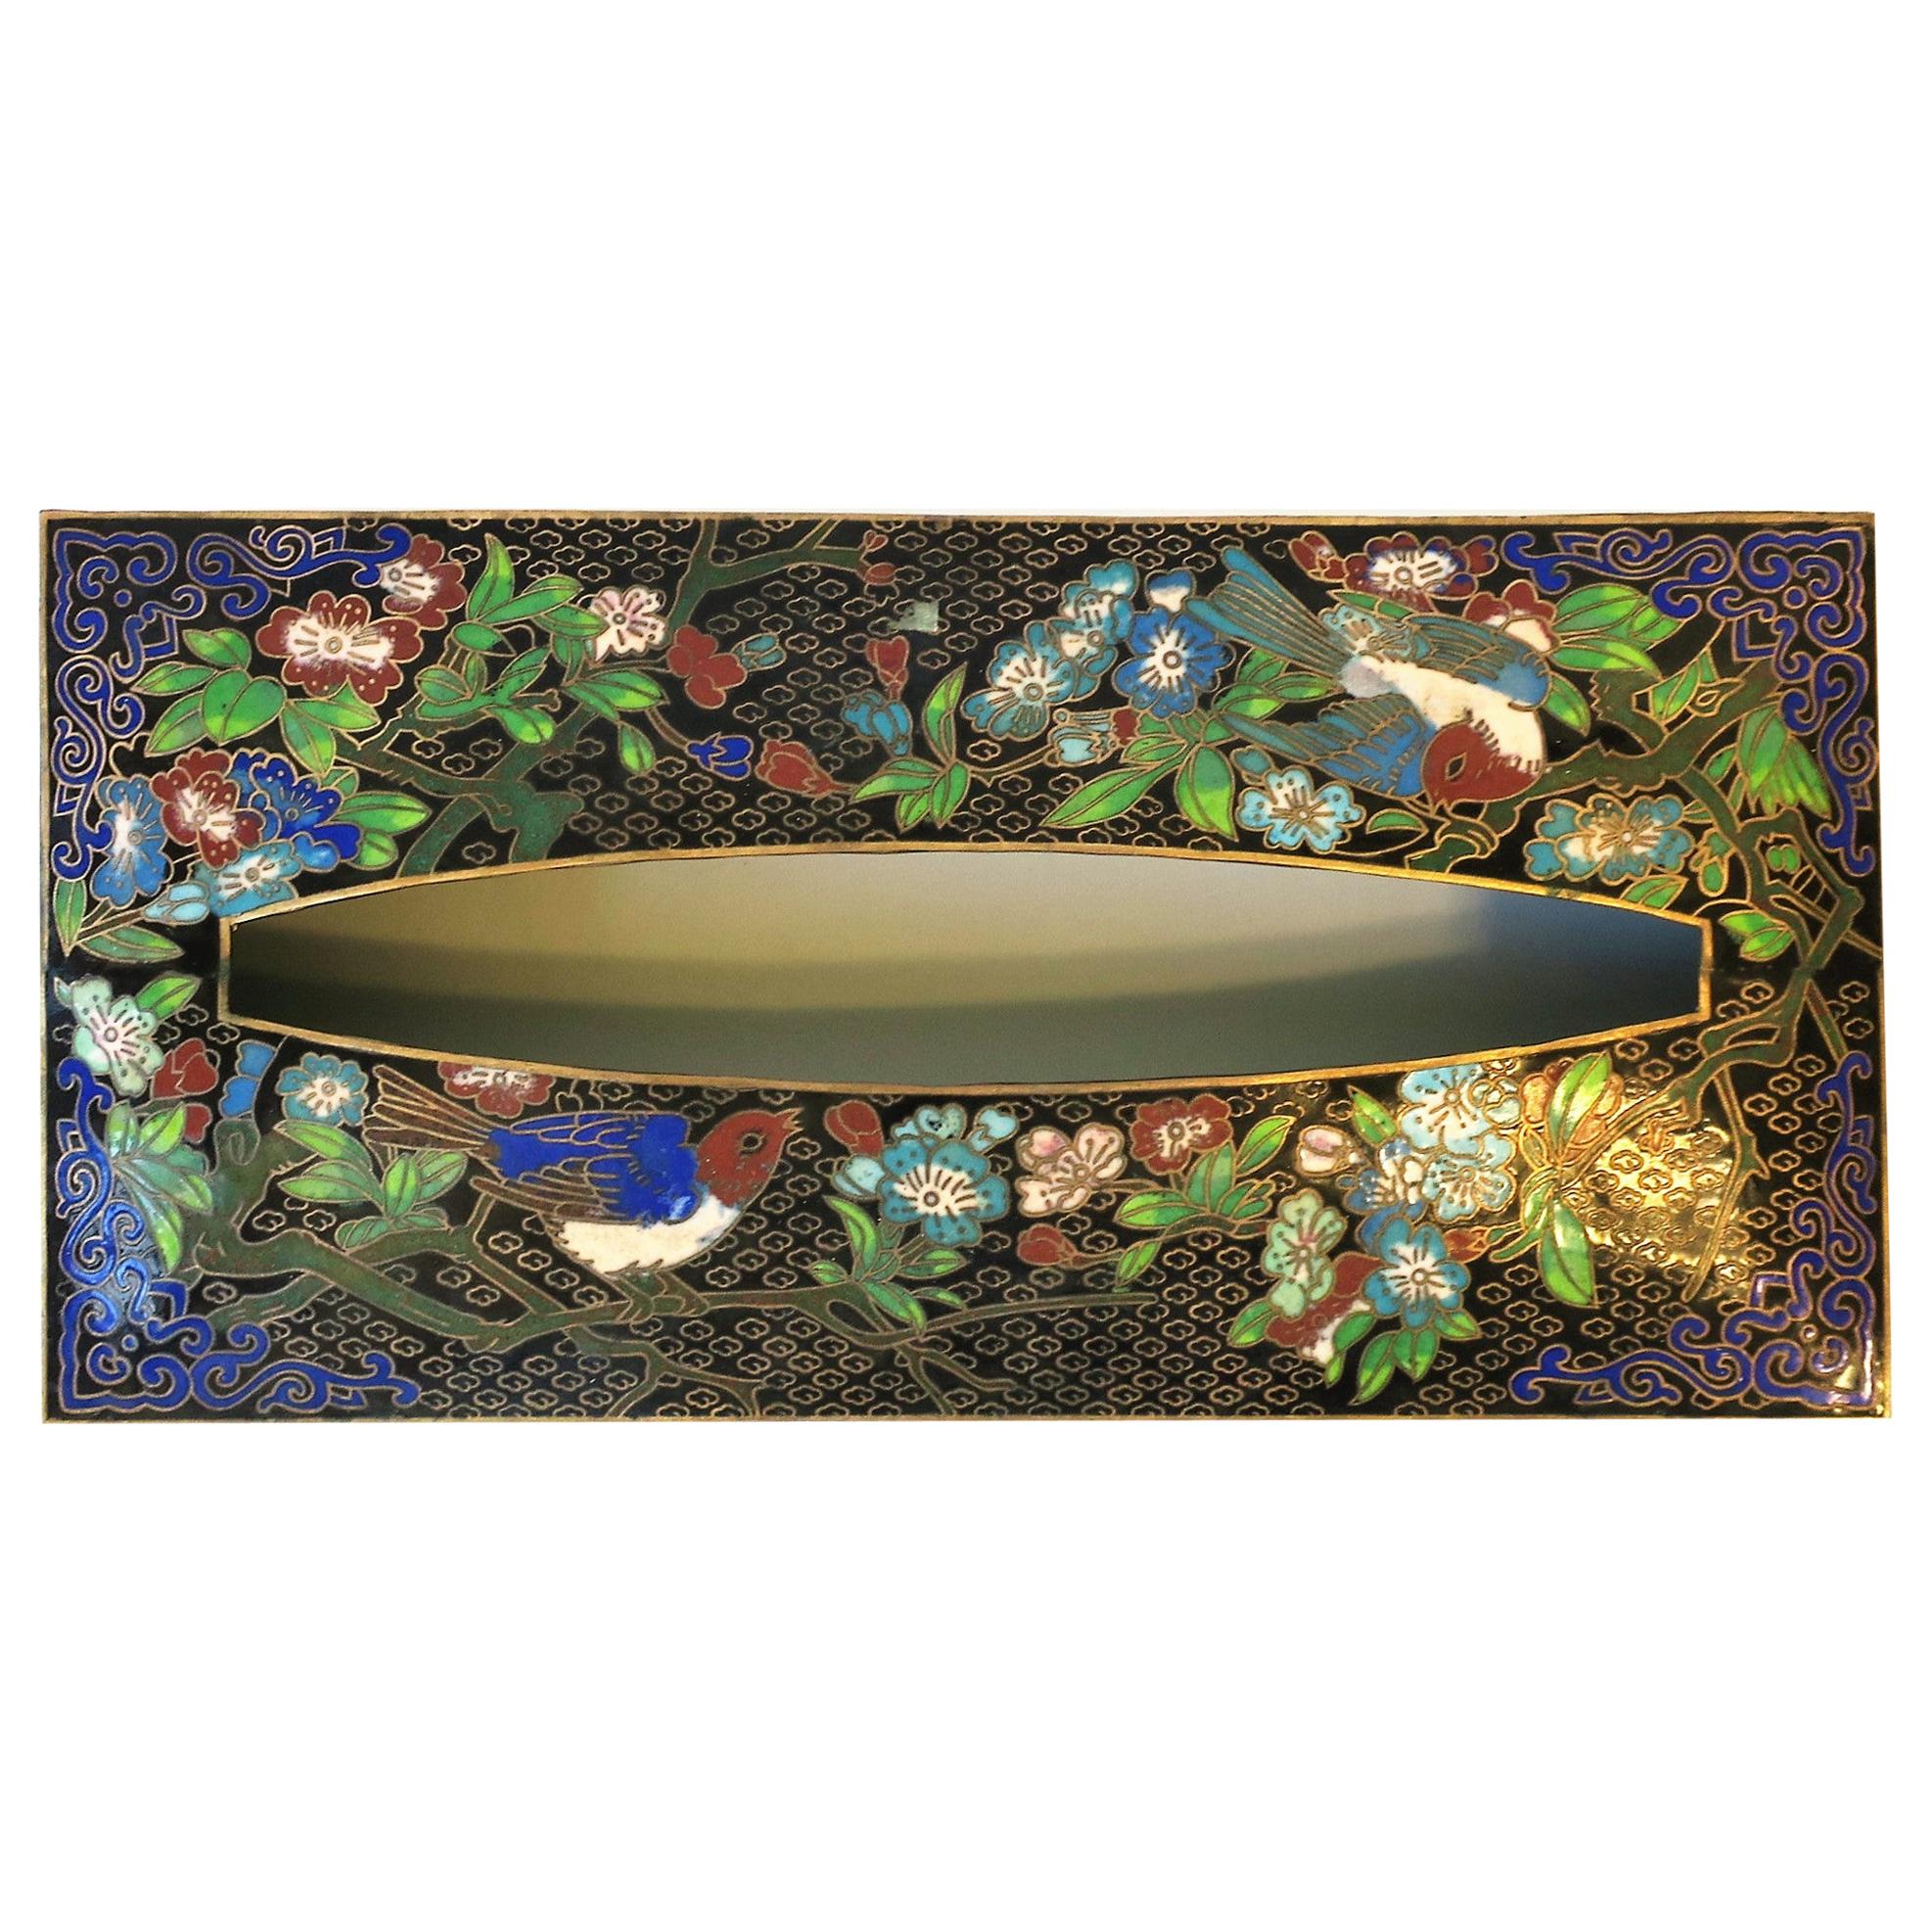 Brass and Cloisonné Enamel Tissue Box Holder Cover with Birds and Flowers